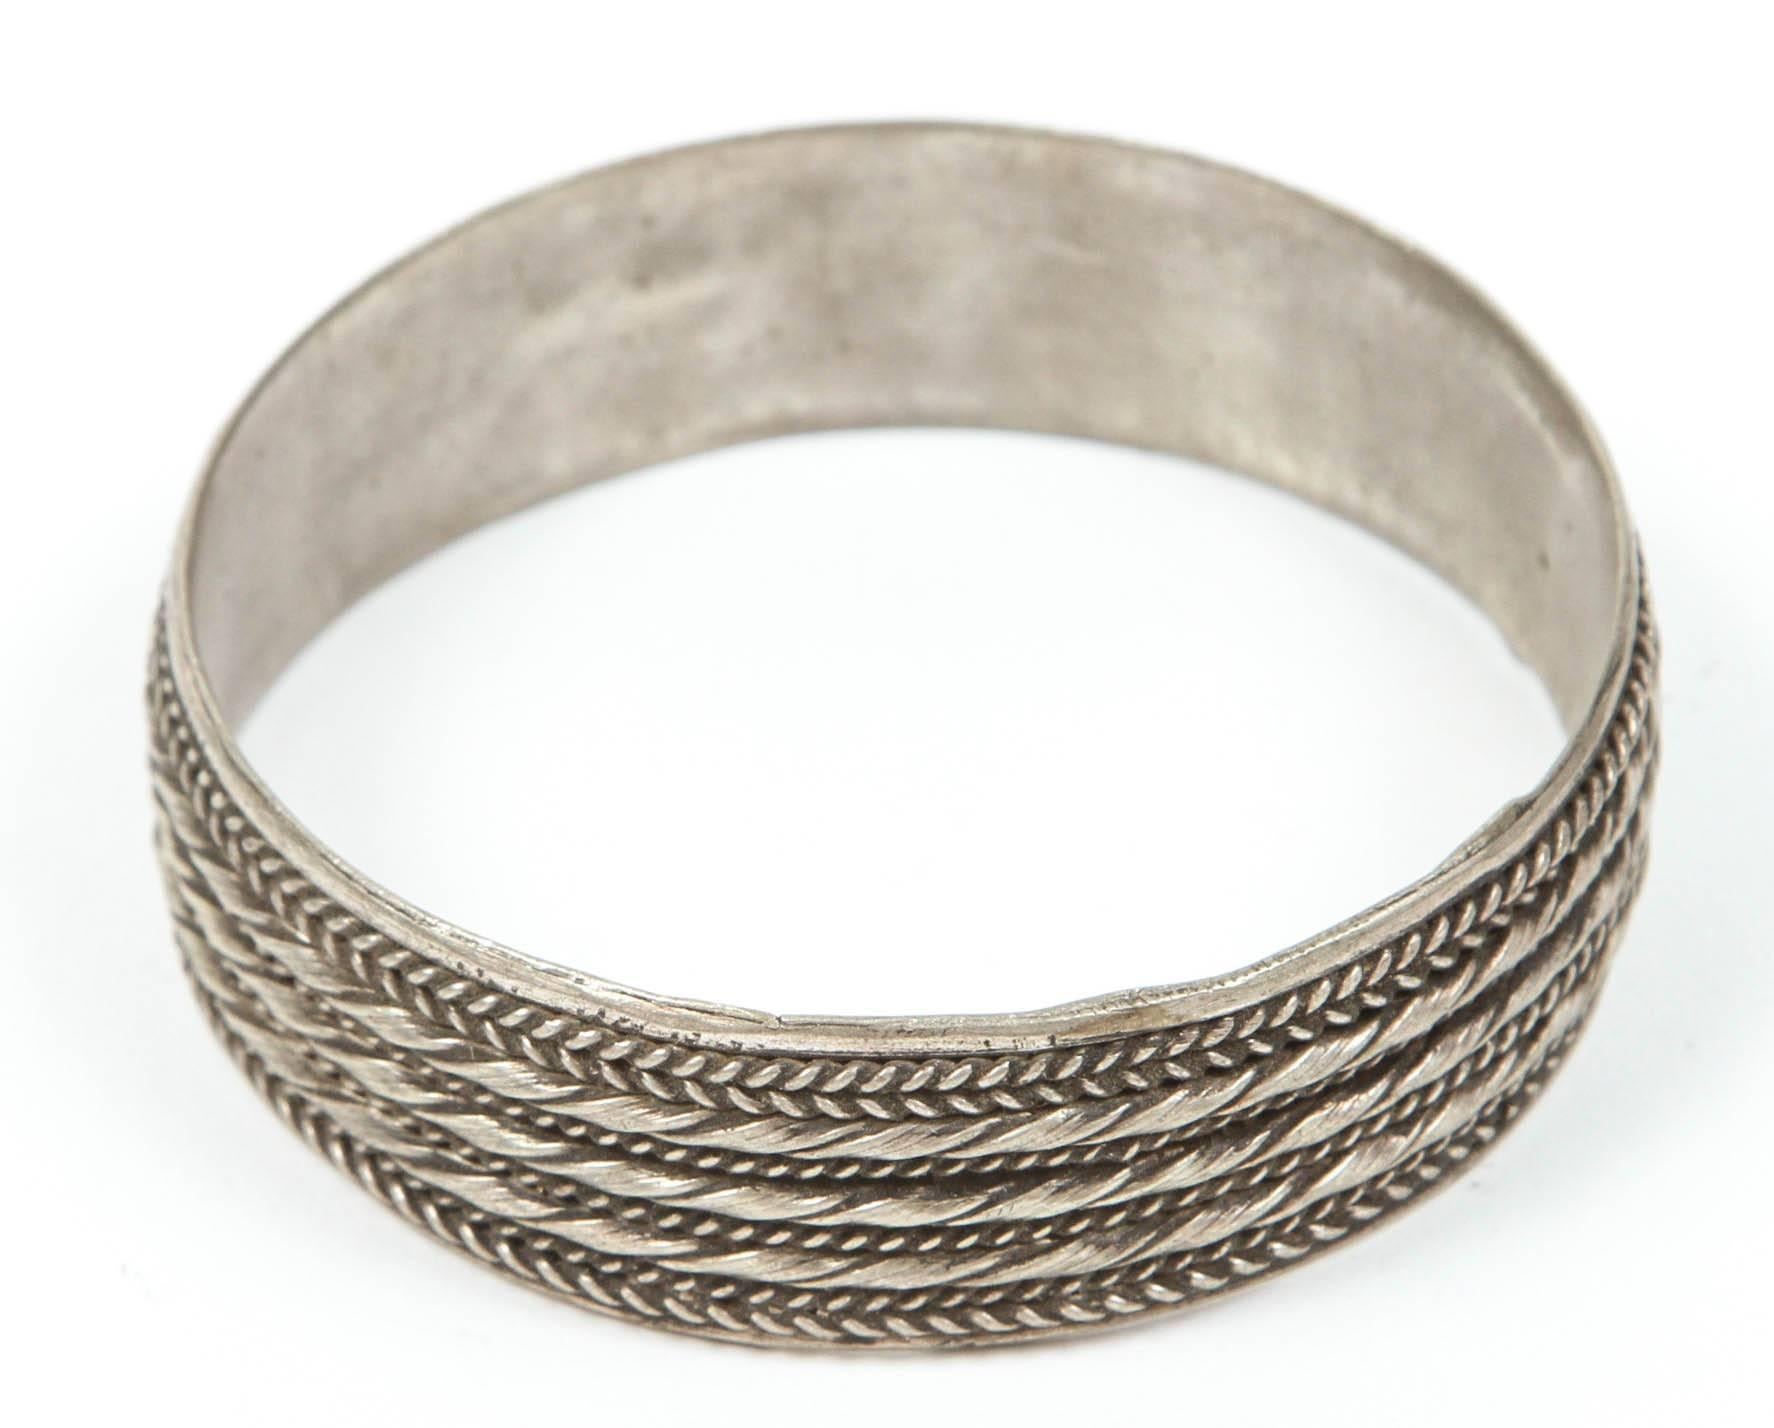 Moroccan Berber tribal bracelet. 
Moroccan tribal bracelets from the High Atlas of Morocco. 
Handcrafted by Berber women using Moroccan silver nickel. 
The ethnic Nomadic and Bedouin jewelry from the Maghreb and North Africa is usually made of